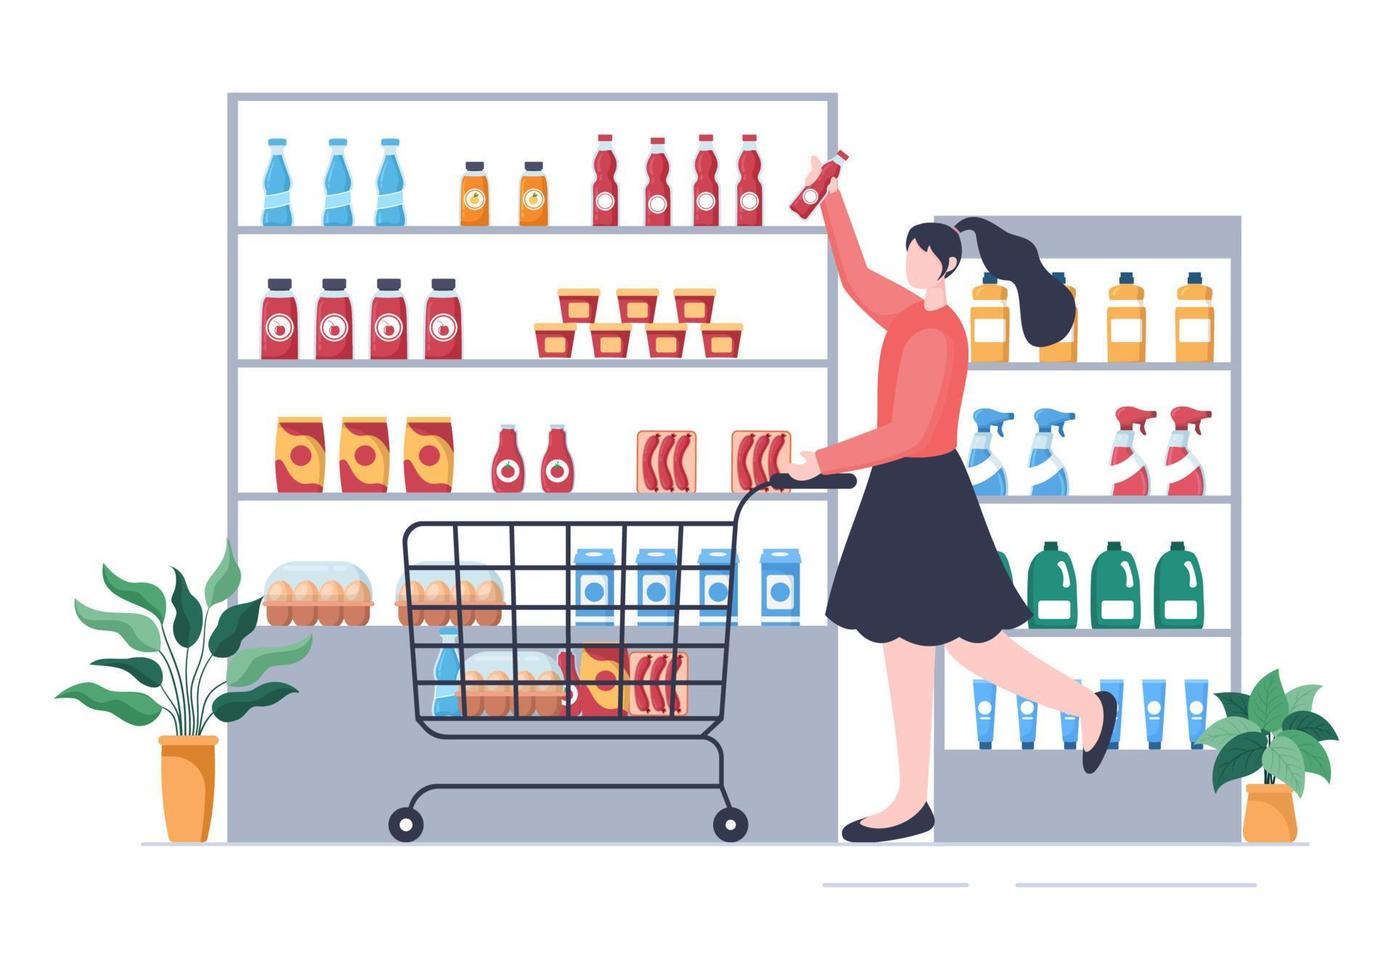 Supermarket with Shelves, Grocery Items and Full Shopping Cart, Retail, Products and Consumers in Flat Cartoon Background Illustration vector